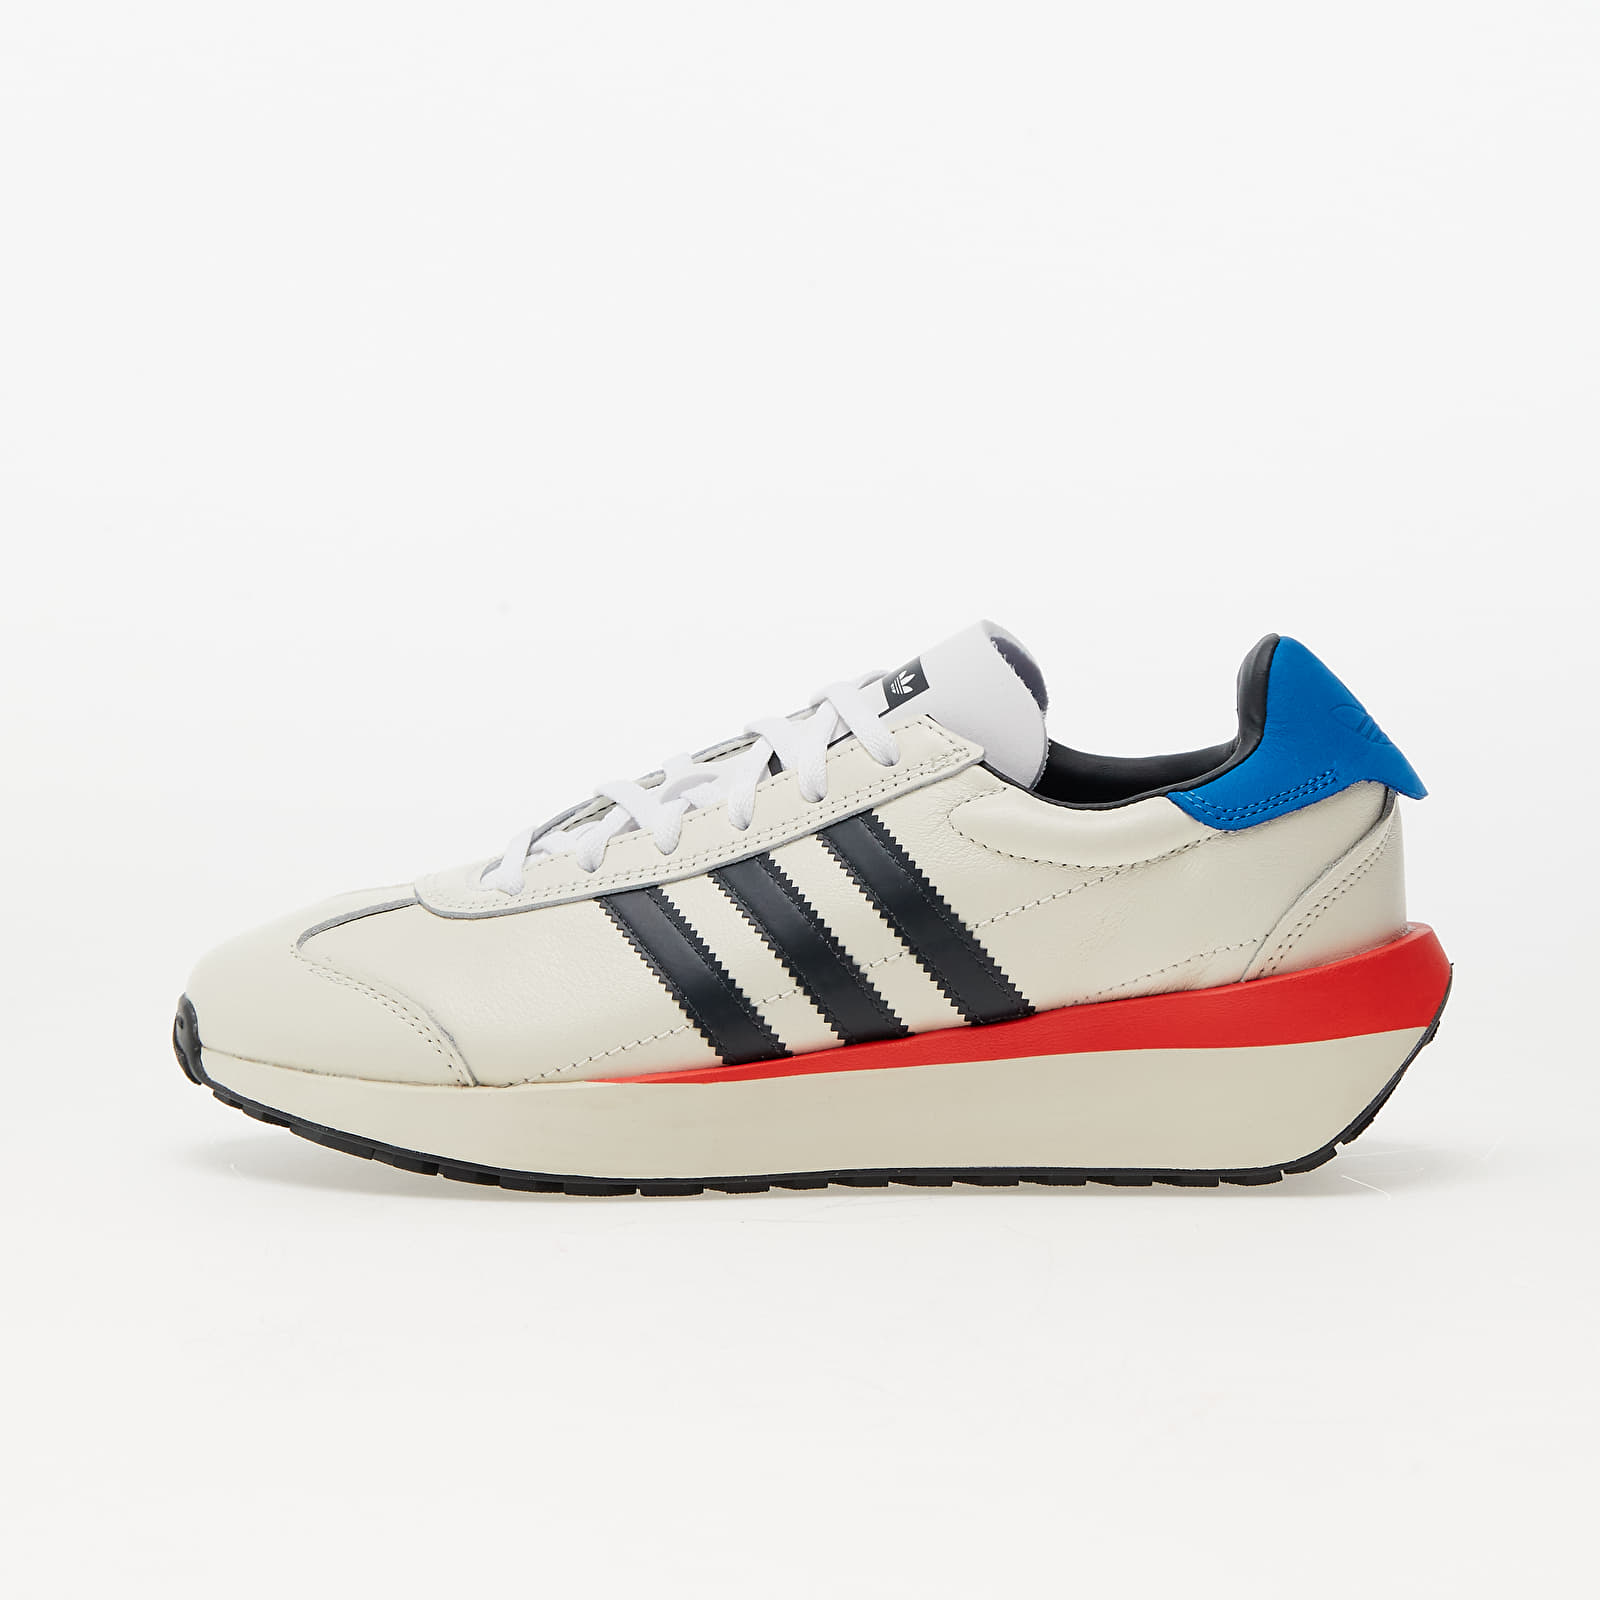 Buty męskie adidas Country Xlg Off White/ Carbon/ Blue Bird